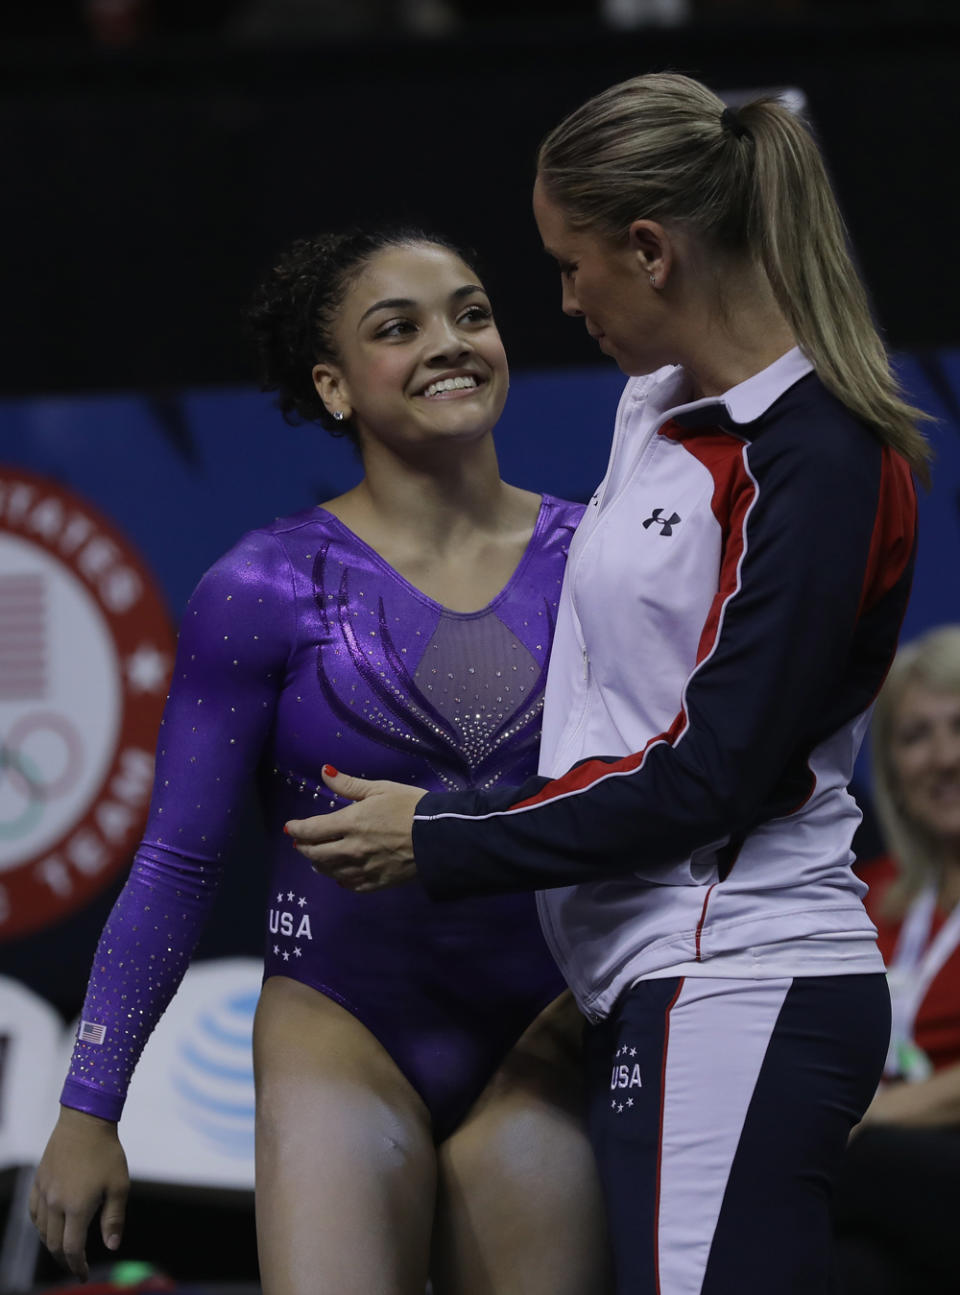 <p>Lauren Hernandez with Maggie Haney after competing on the balance beam during day 1 of the 2016 U.S. Olympic Women’s Gymnastics Team Trials at SAP Center on July 8, 2016 in San Jose, California. (Photo by Ronald Martinez/Getty Images) </p>